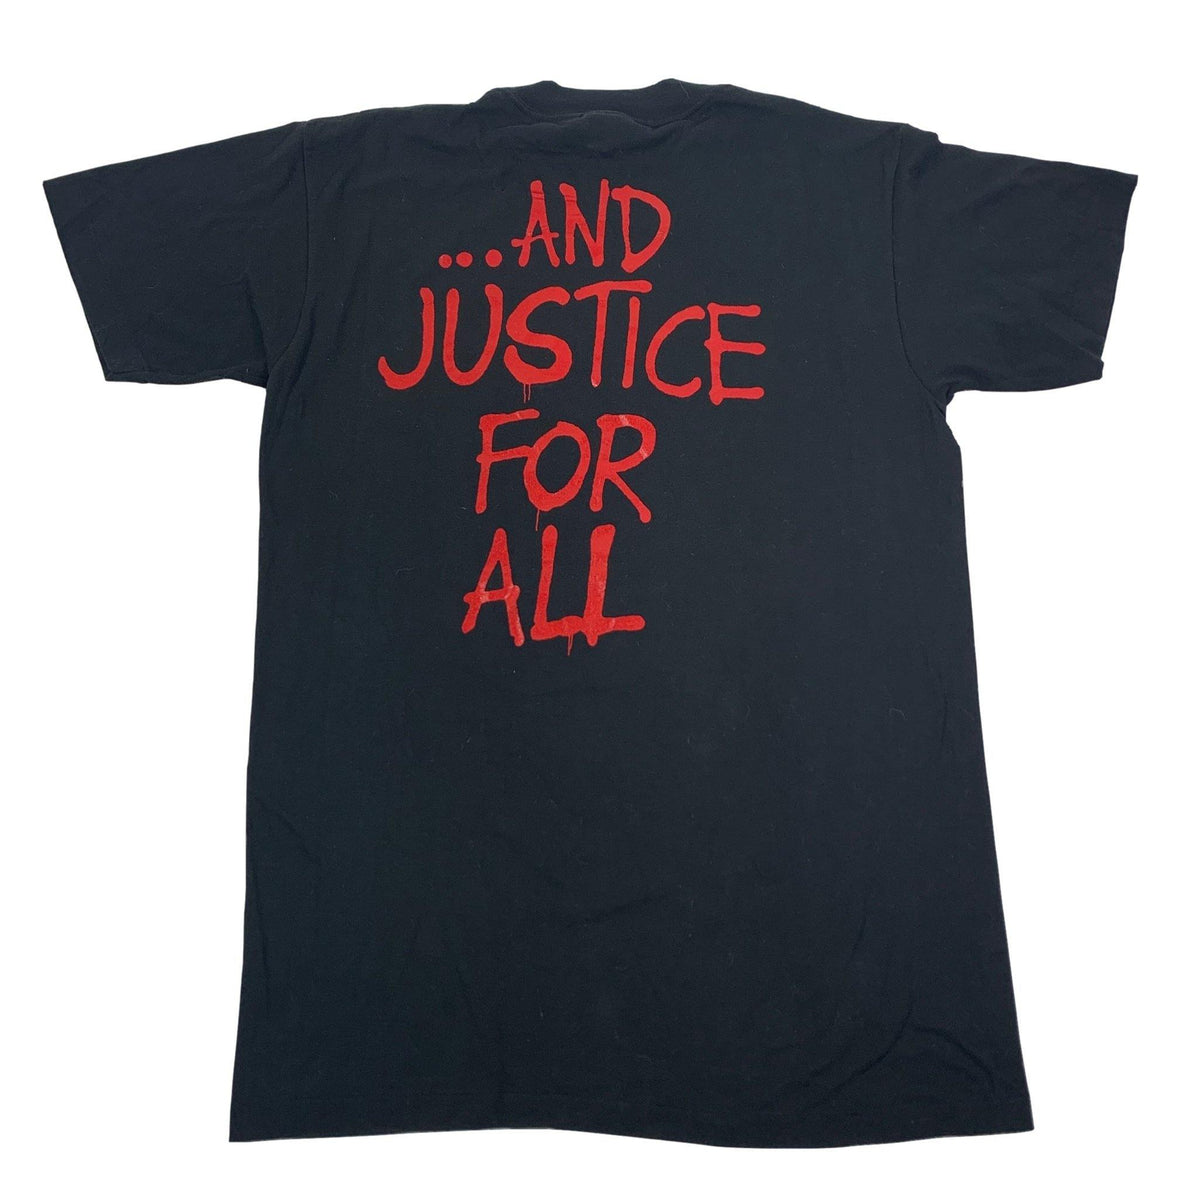 Vintage Metallica &quot;...And Justice For All&quot; T-Shirt - jointcustodydc